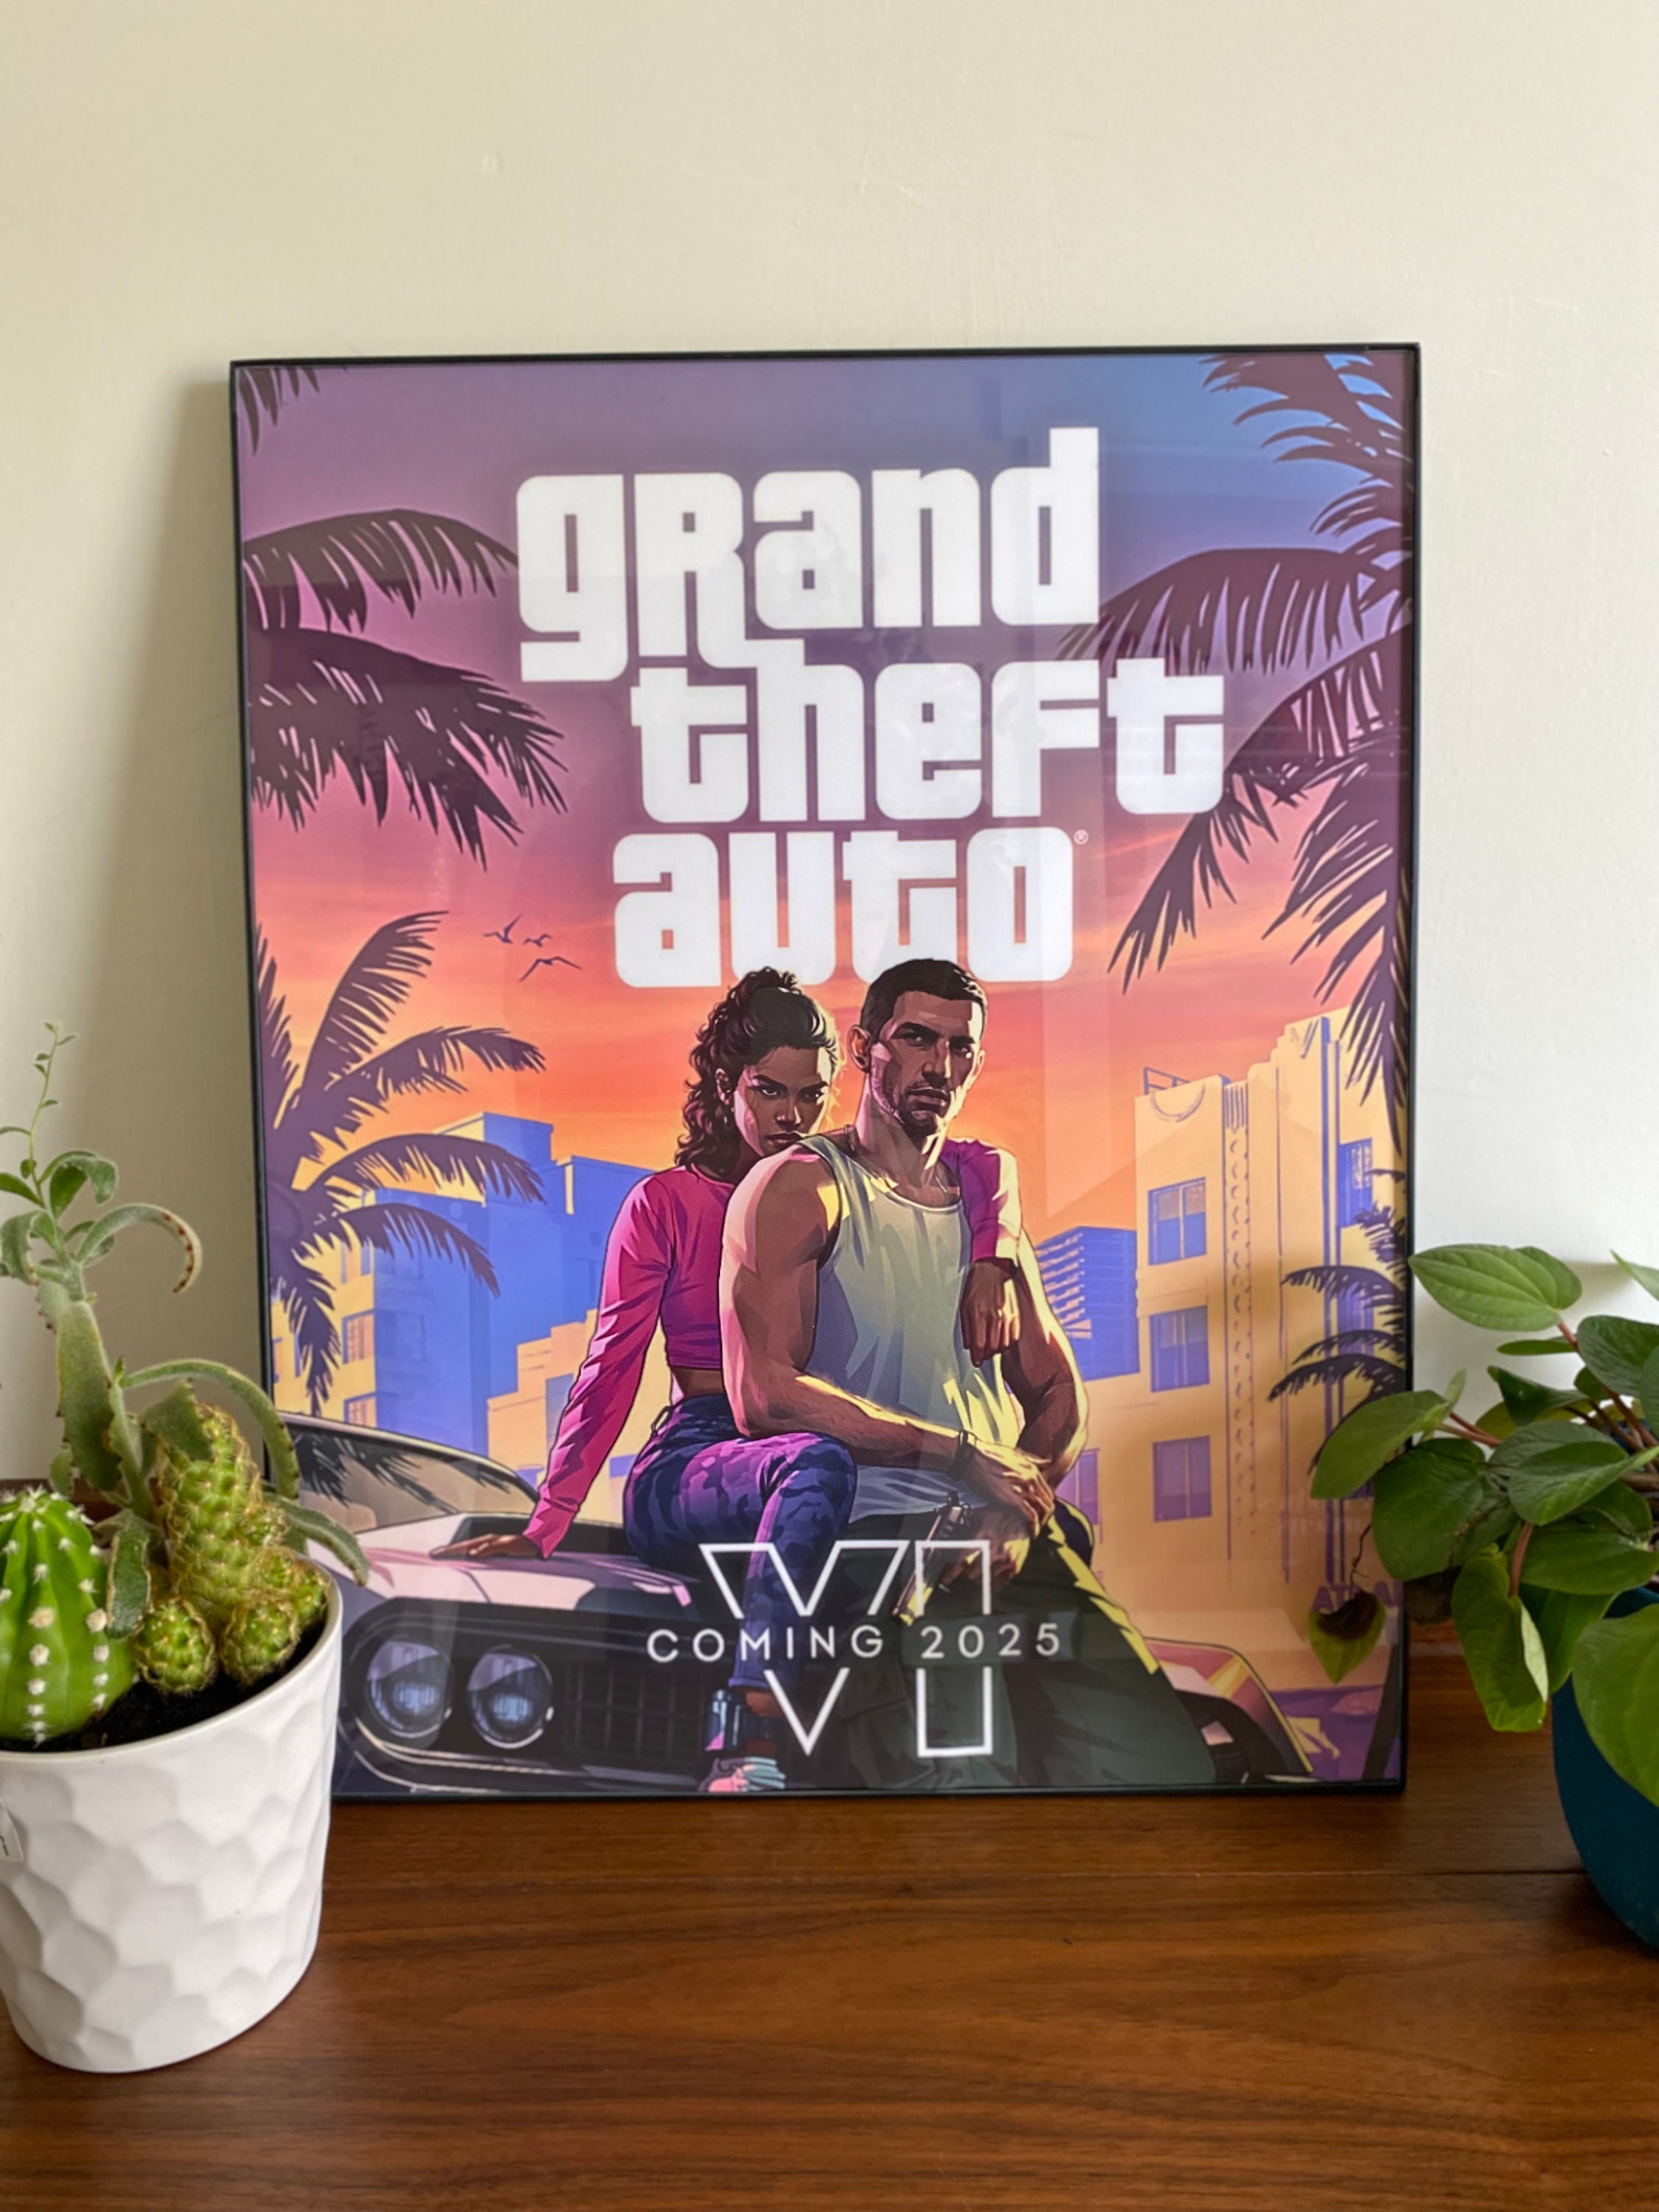 GTA V and GTA IV Crossover PS2 exclusive (Found this in Egypt